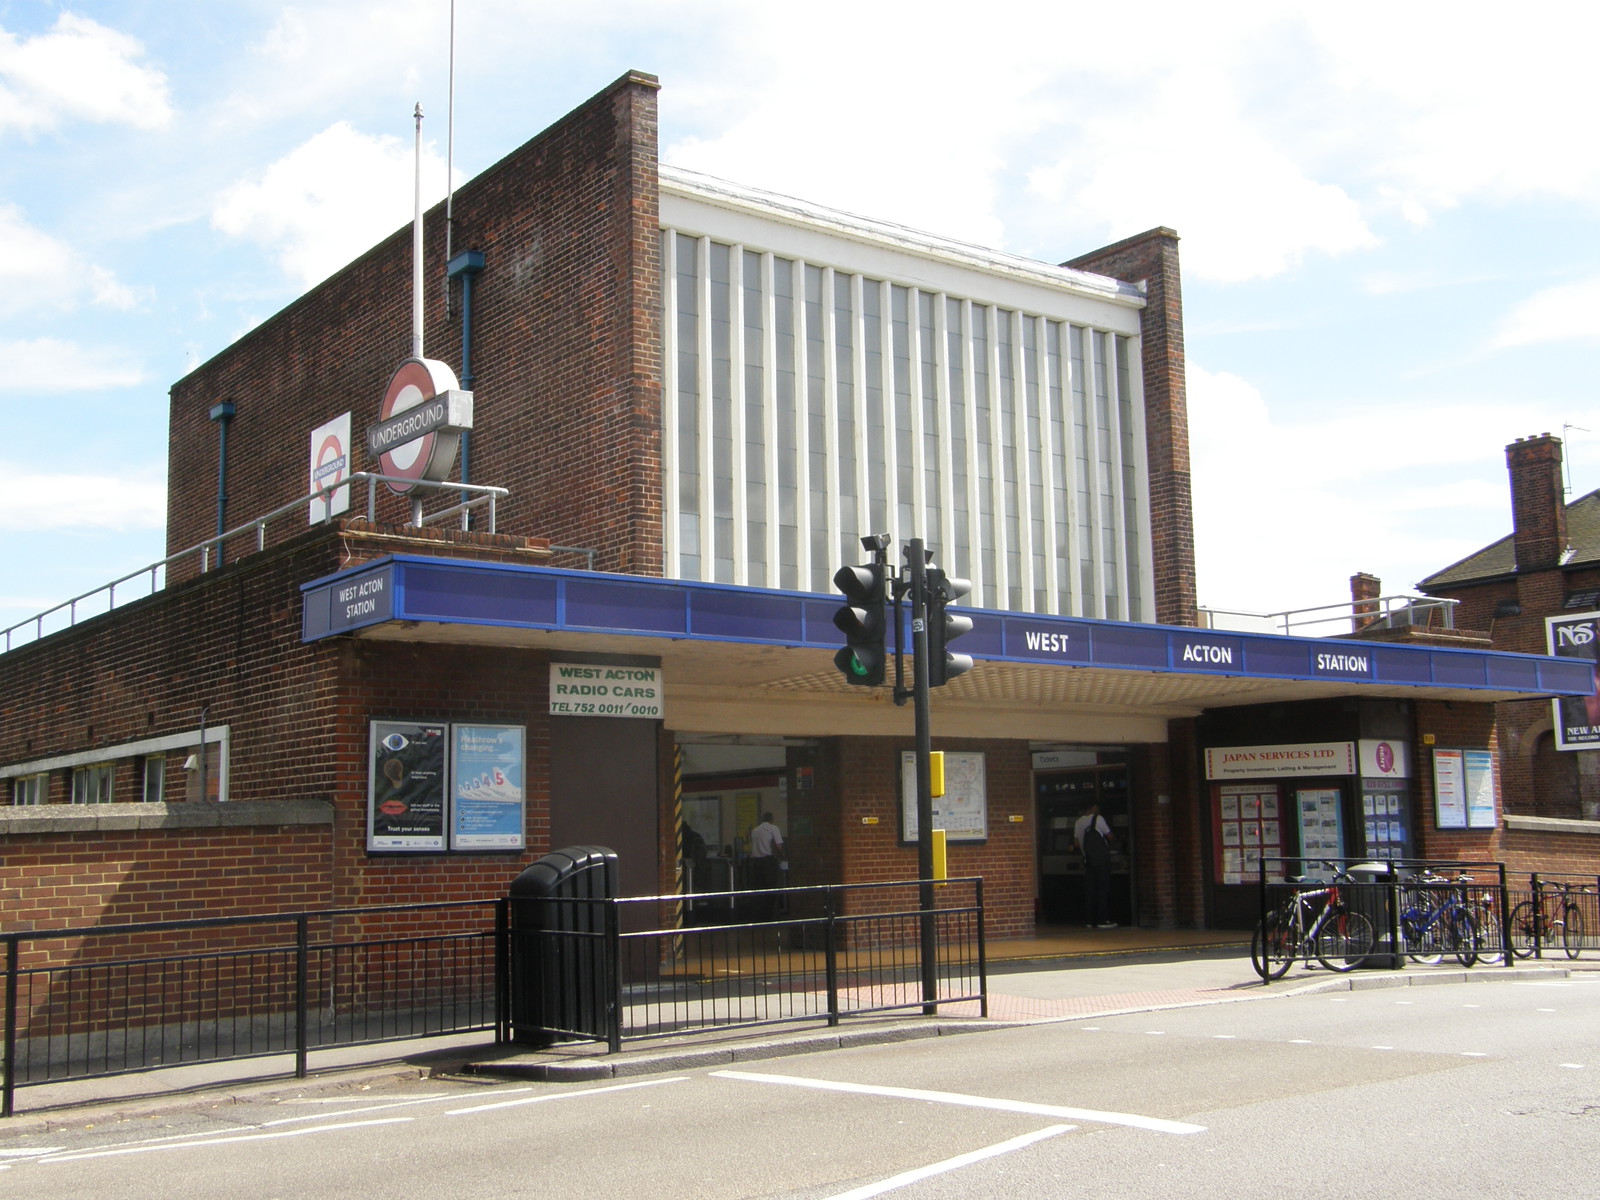 West Acton station